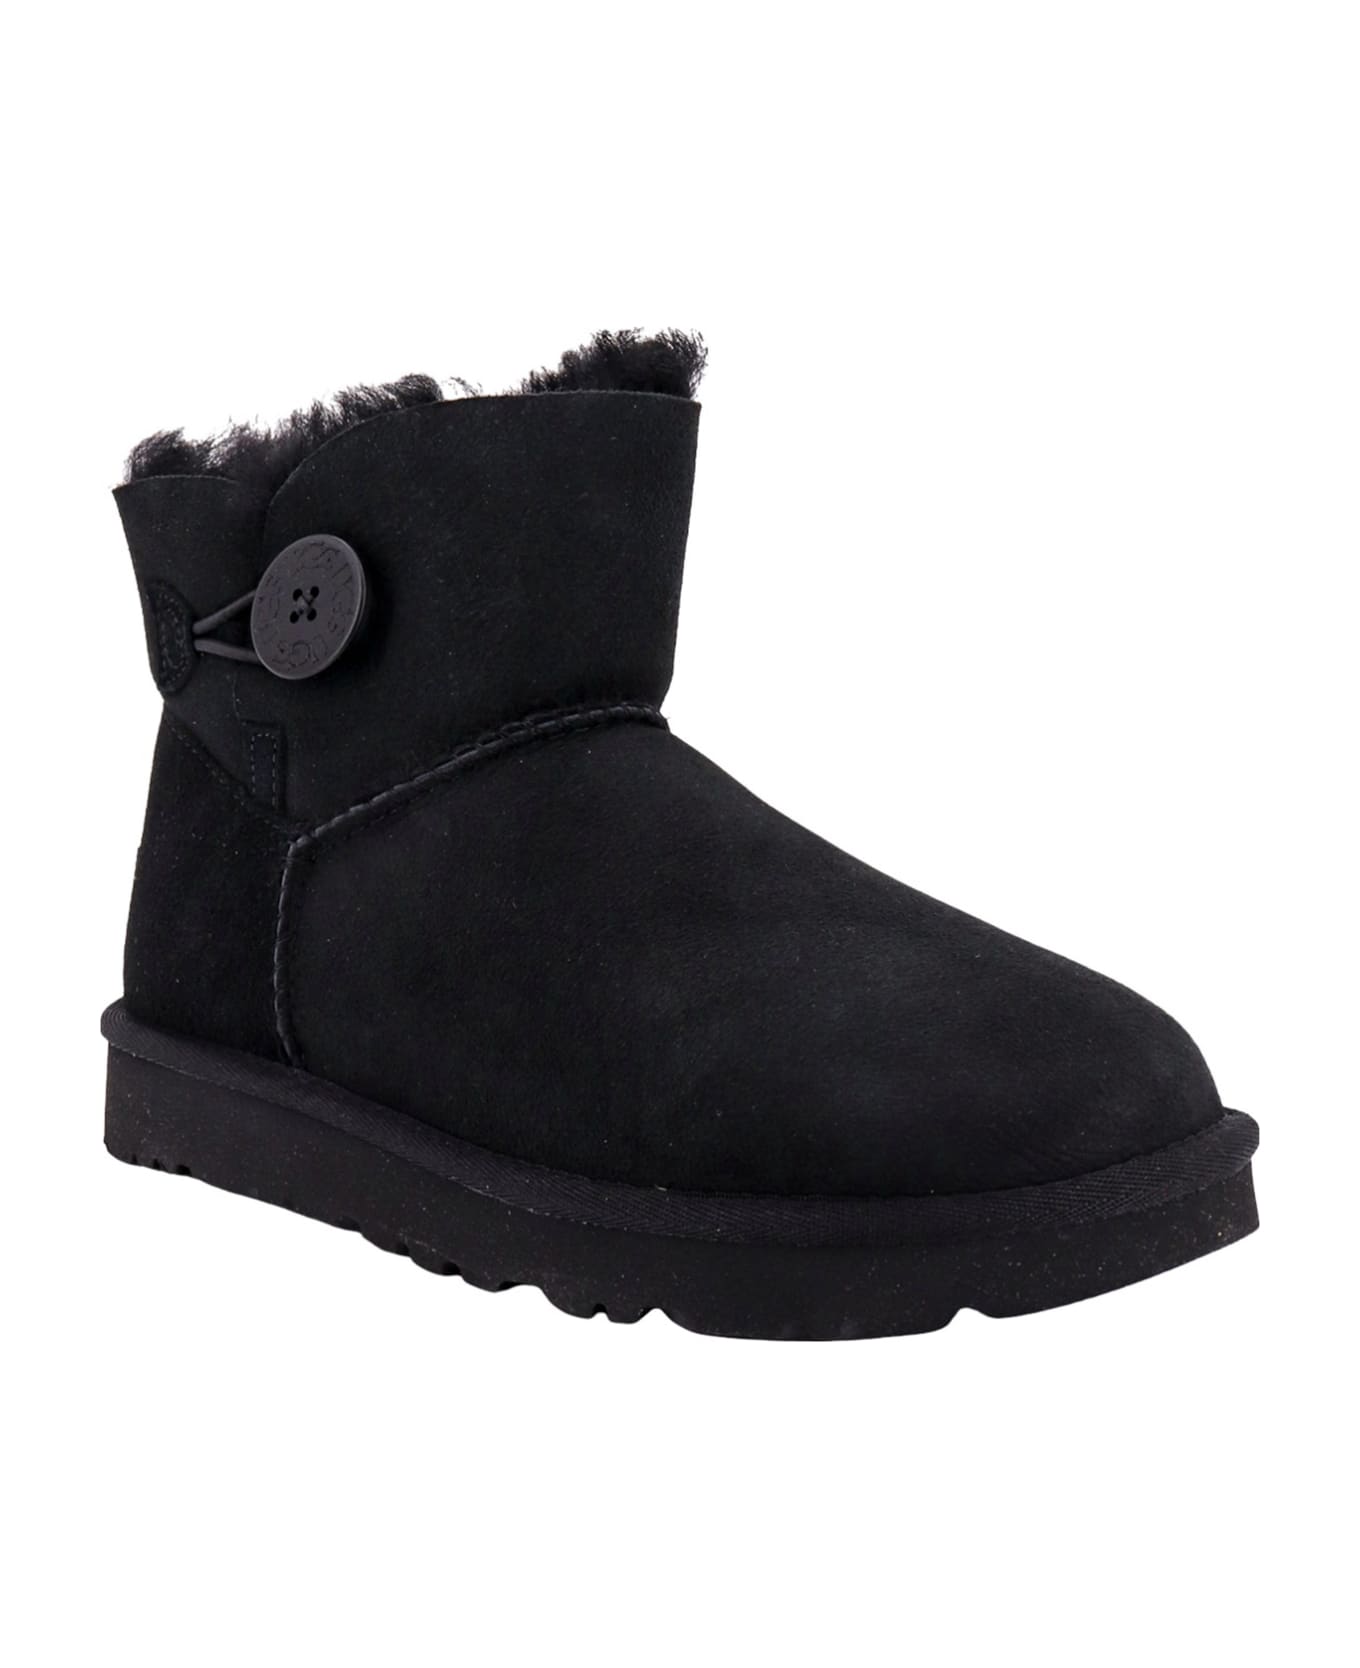 UGG Mini Baley Button Ankle Boots - Black